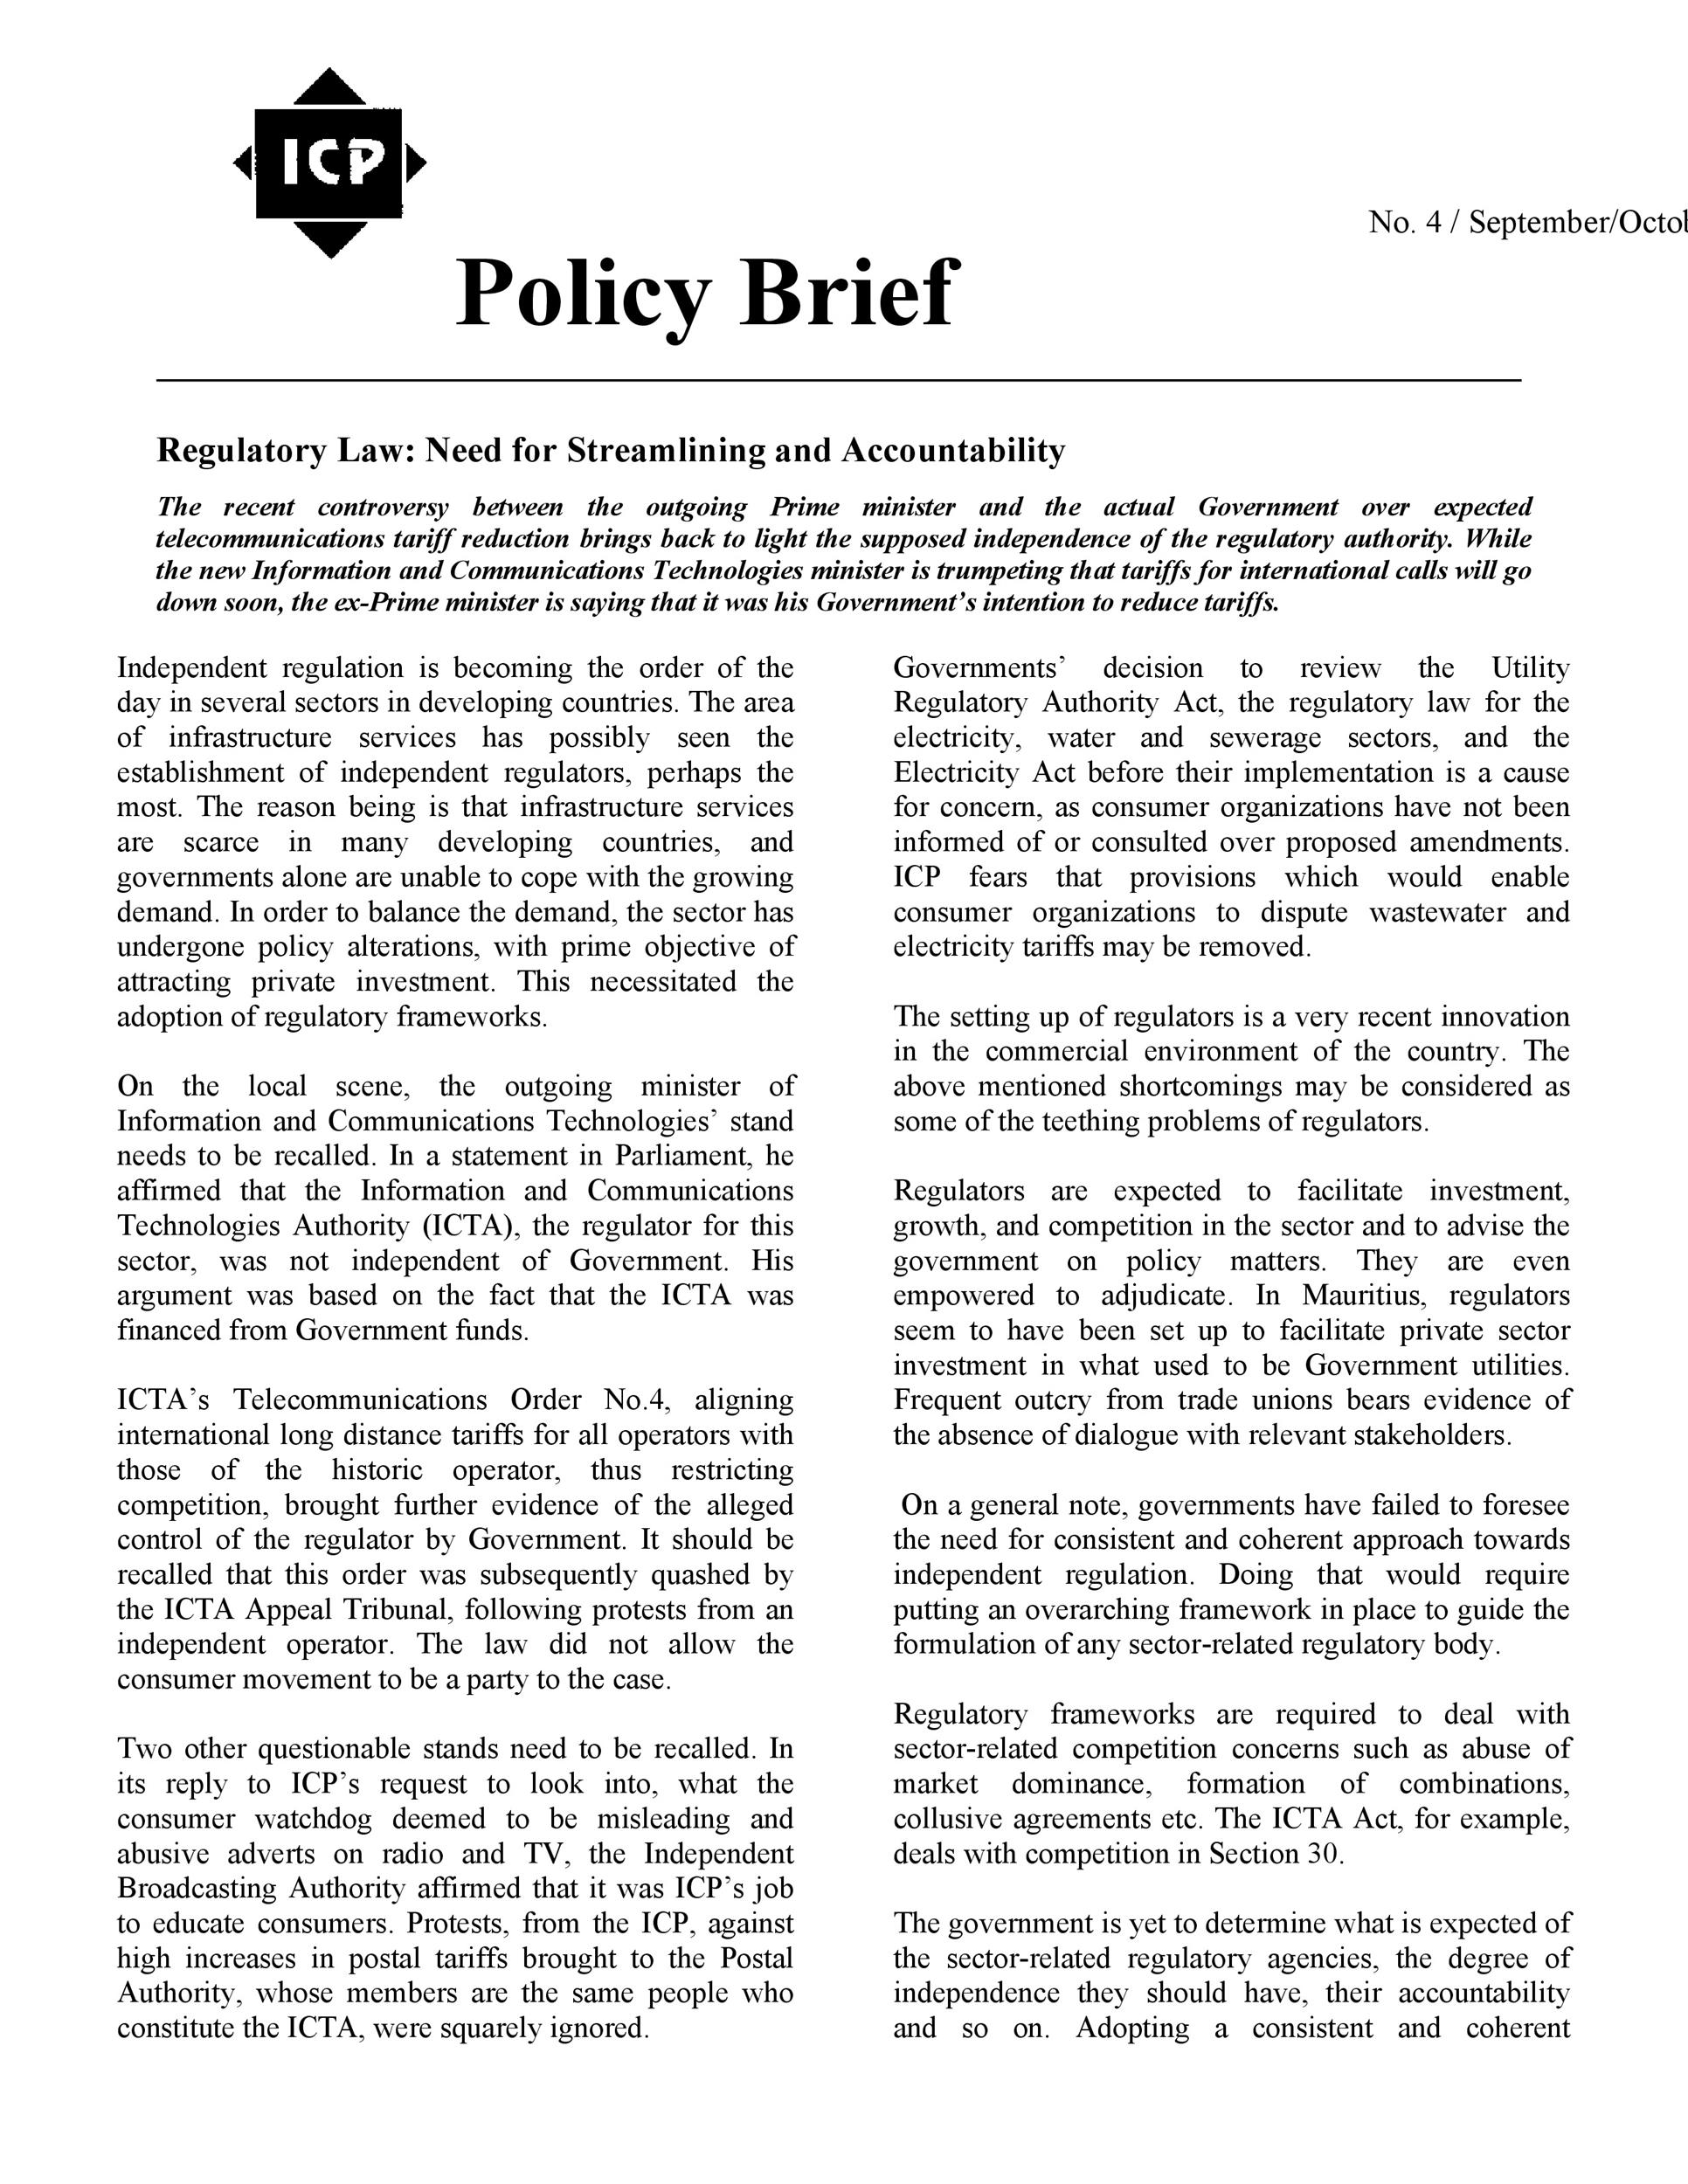 Free policy brief template 17